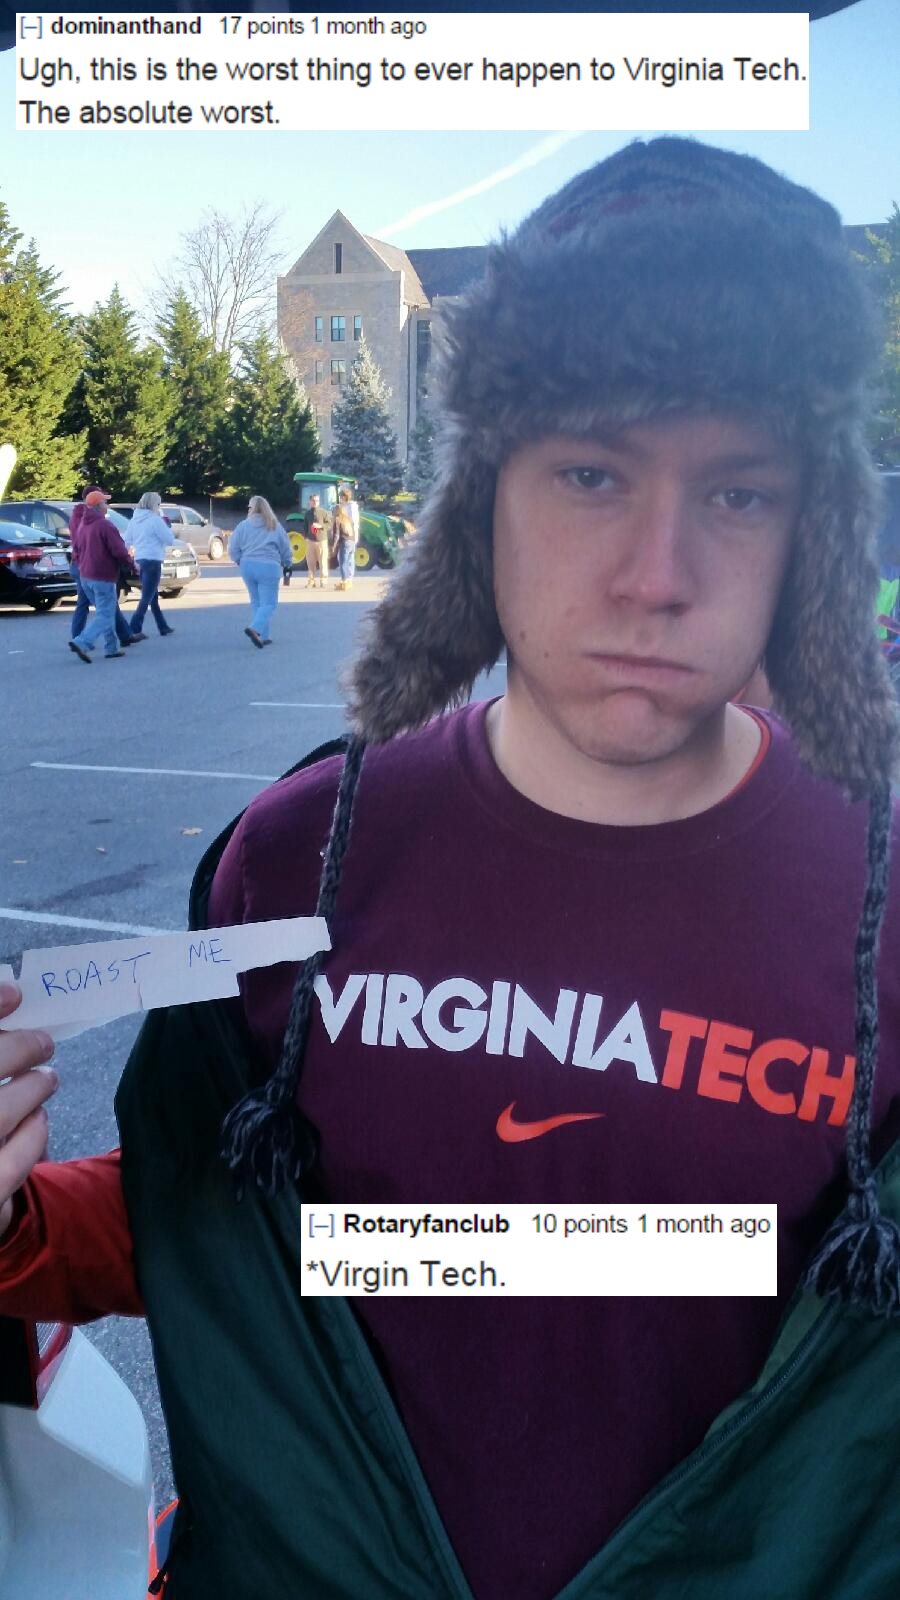 worst roasts ever - dominanthand 17 points 1 month ago Ugh, this is the worst thing to ever happen to Virginia Tech. The absolute worst. Me Roast Virginiatech Rotaryfanclub 10 points 1 month ago Virgin Tech.